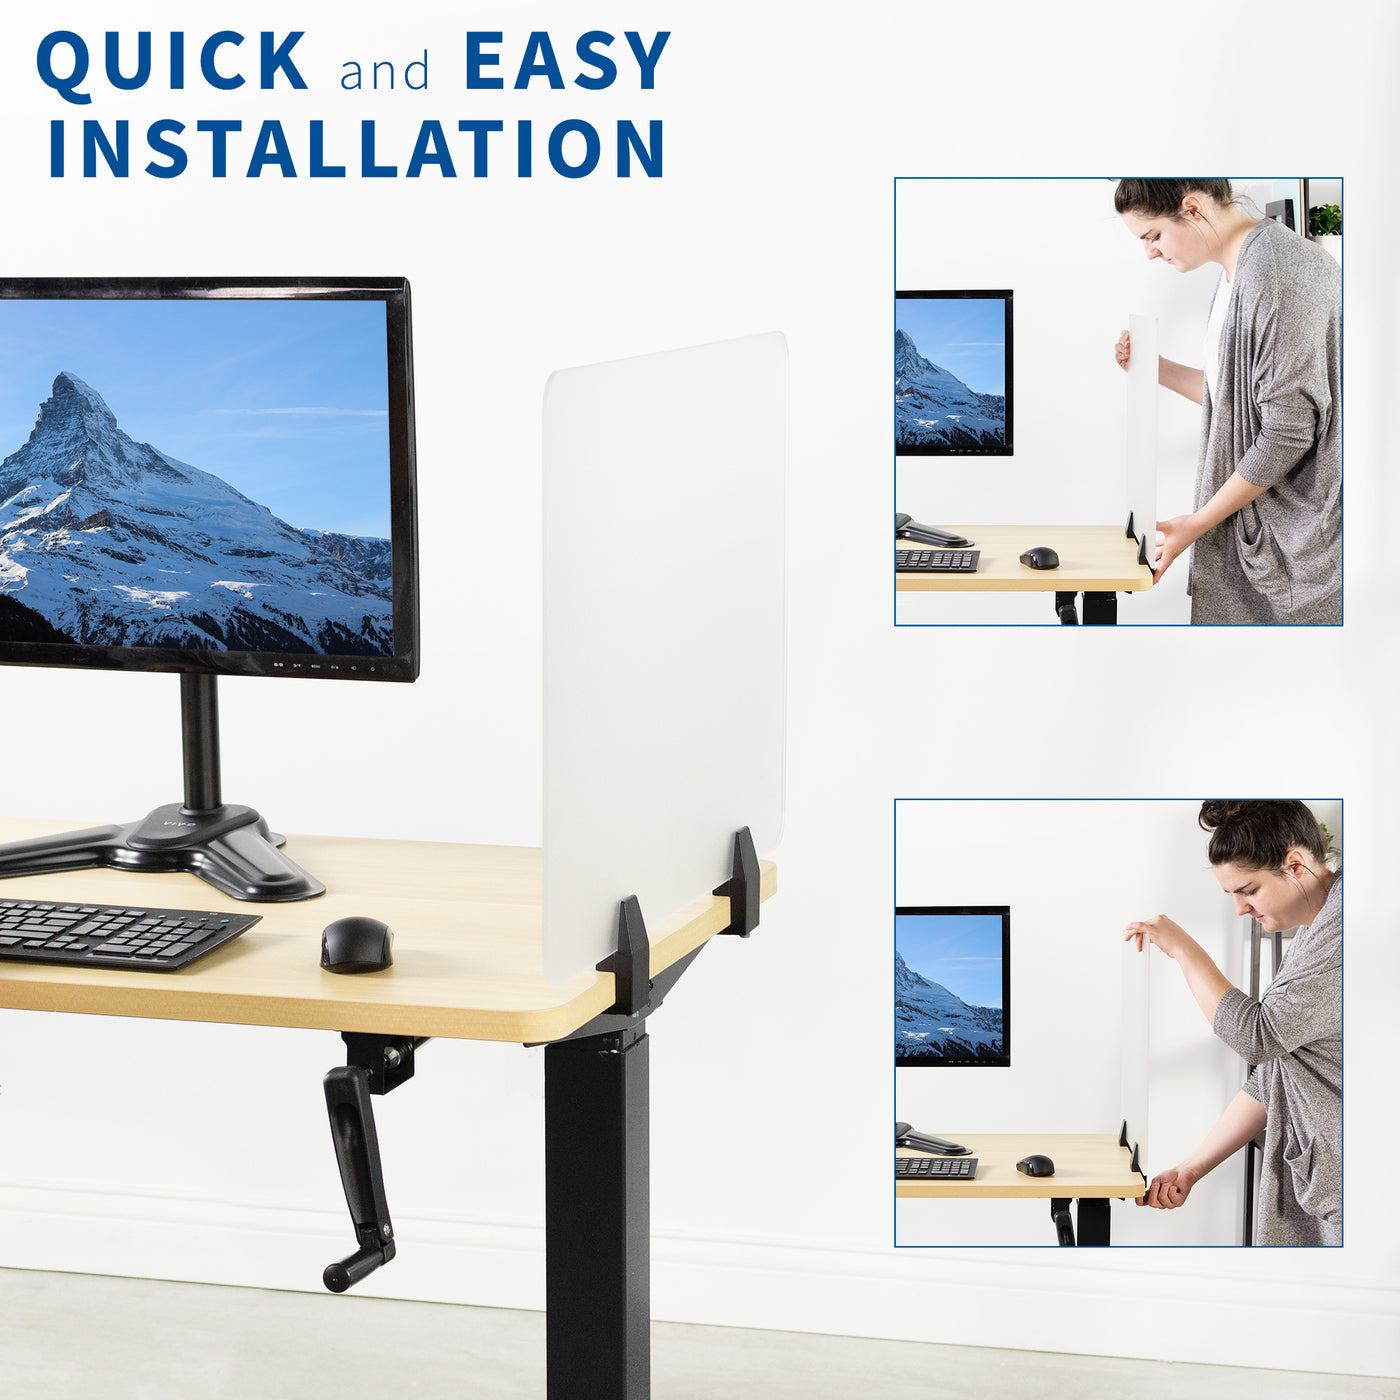 Frosted Clamp-on Desk Privacy Panels quick and easy installation